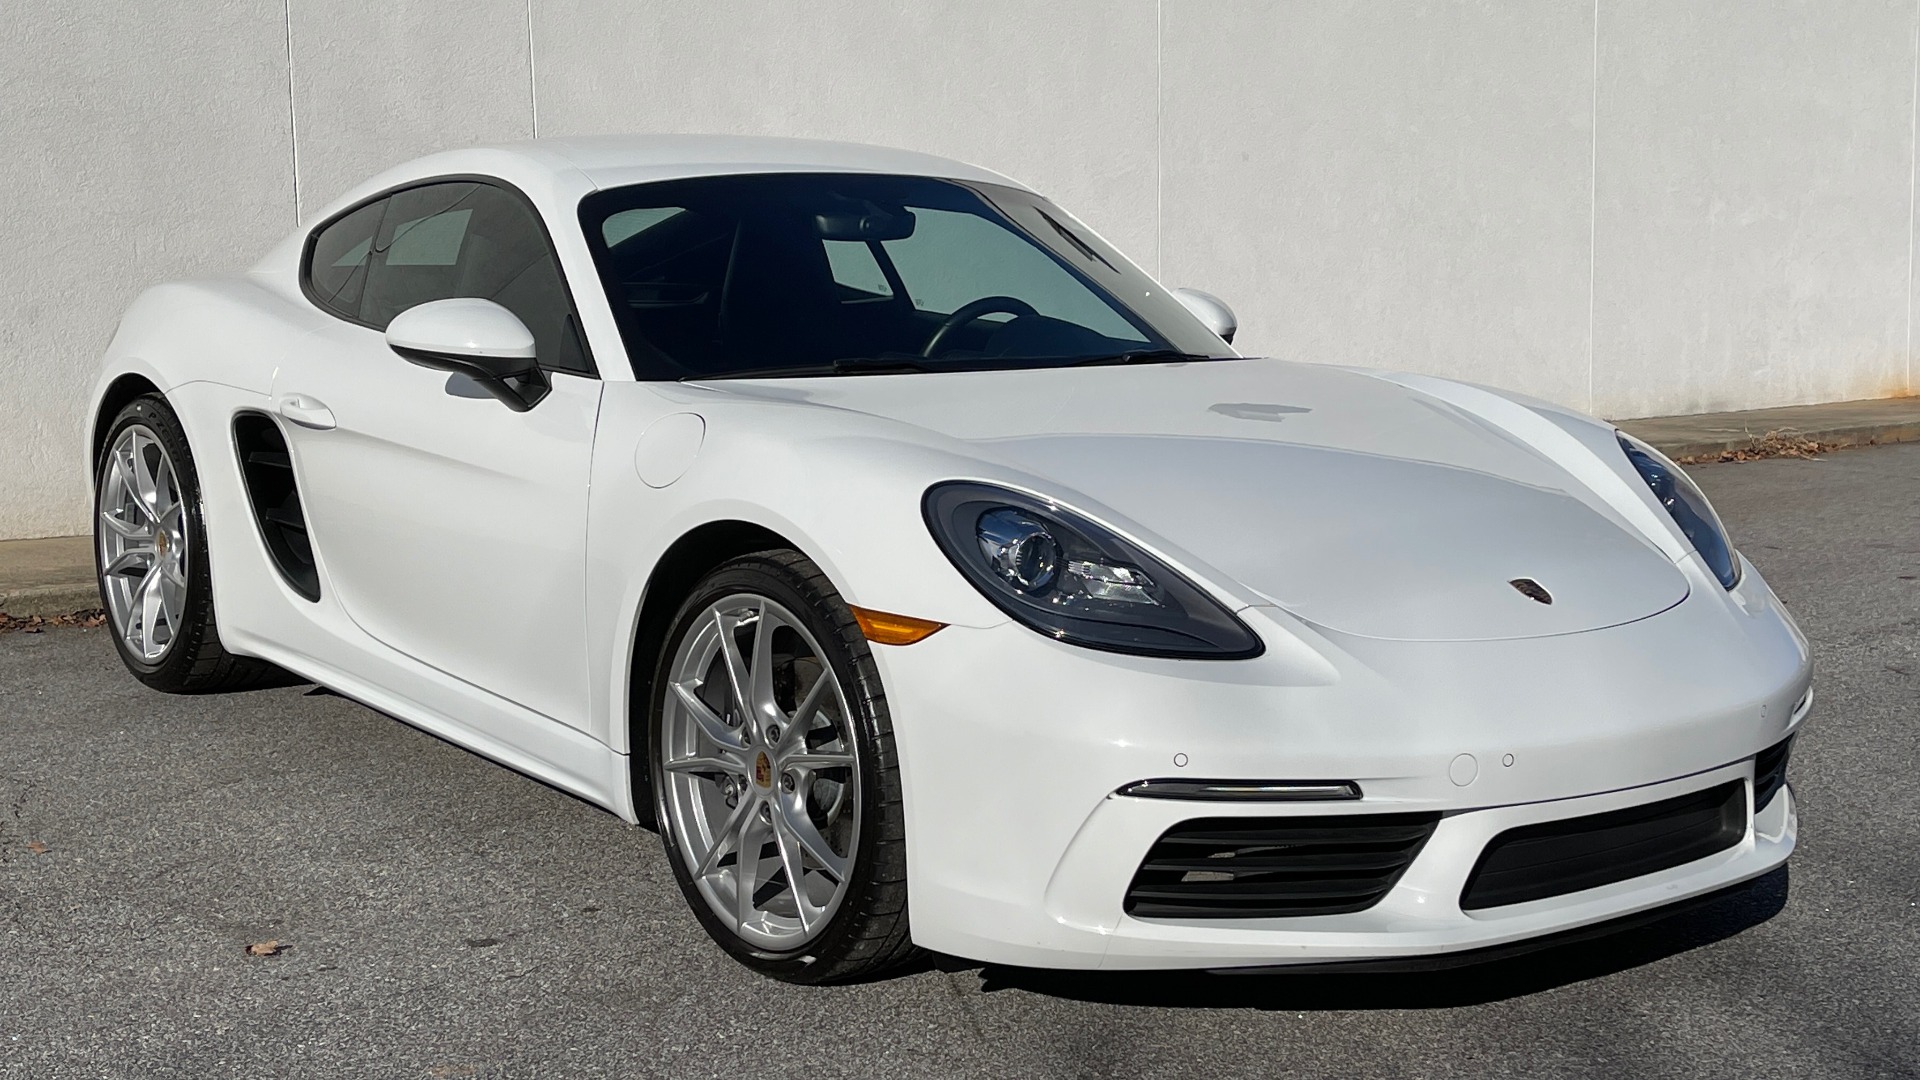 Used 2017 Porsche 718 CAYMAN COUPE / 2.0L TURBO / 6-SPD MANUAL / BOSE / 20-INCH WHEELS for sale $49,395 at Formula Imports in Charlotte NC 28227 8